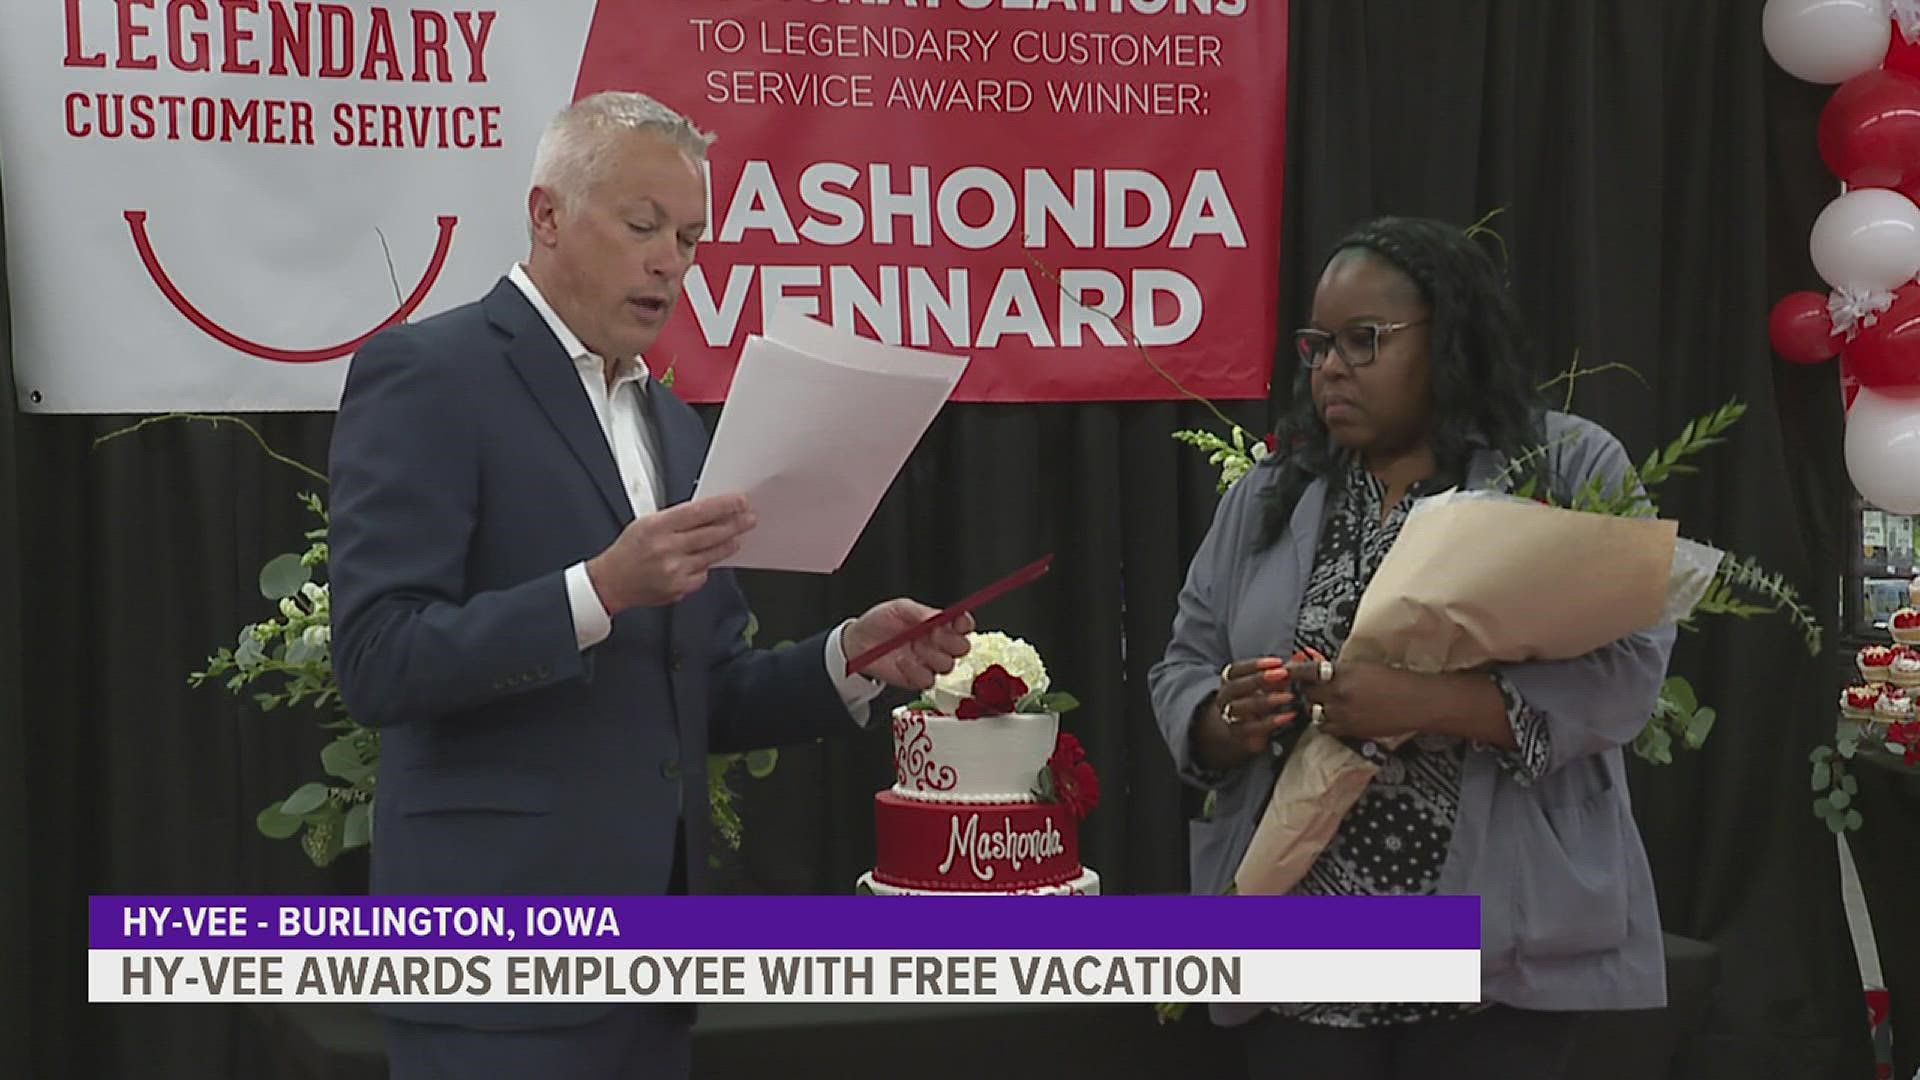 Mashonda Vennard received Hy-Vee's legendary customer service award, one of only 150 recipients company-wide. Now she'll depart to the destination of her choice.